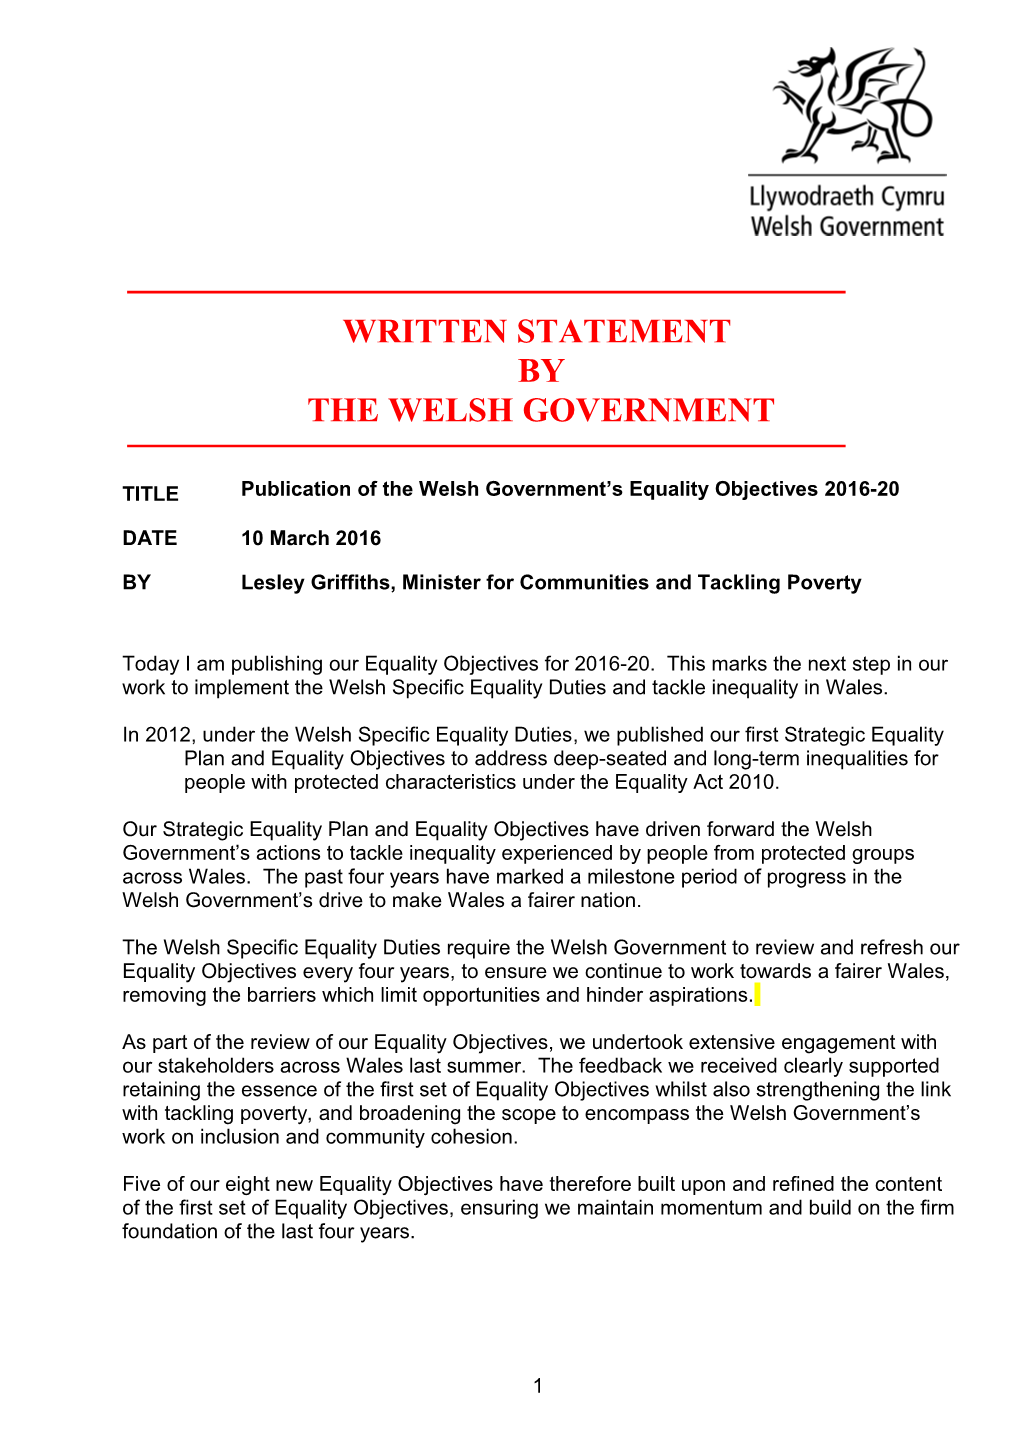 Publication of the Welsh Government S Equality Objectives 2016-20